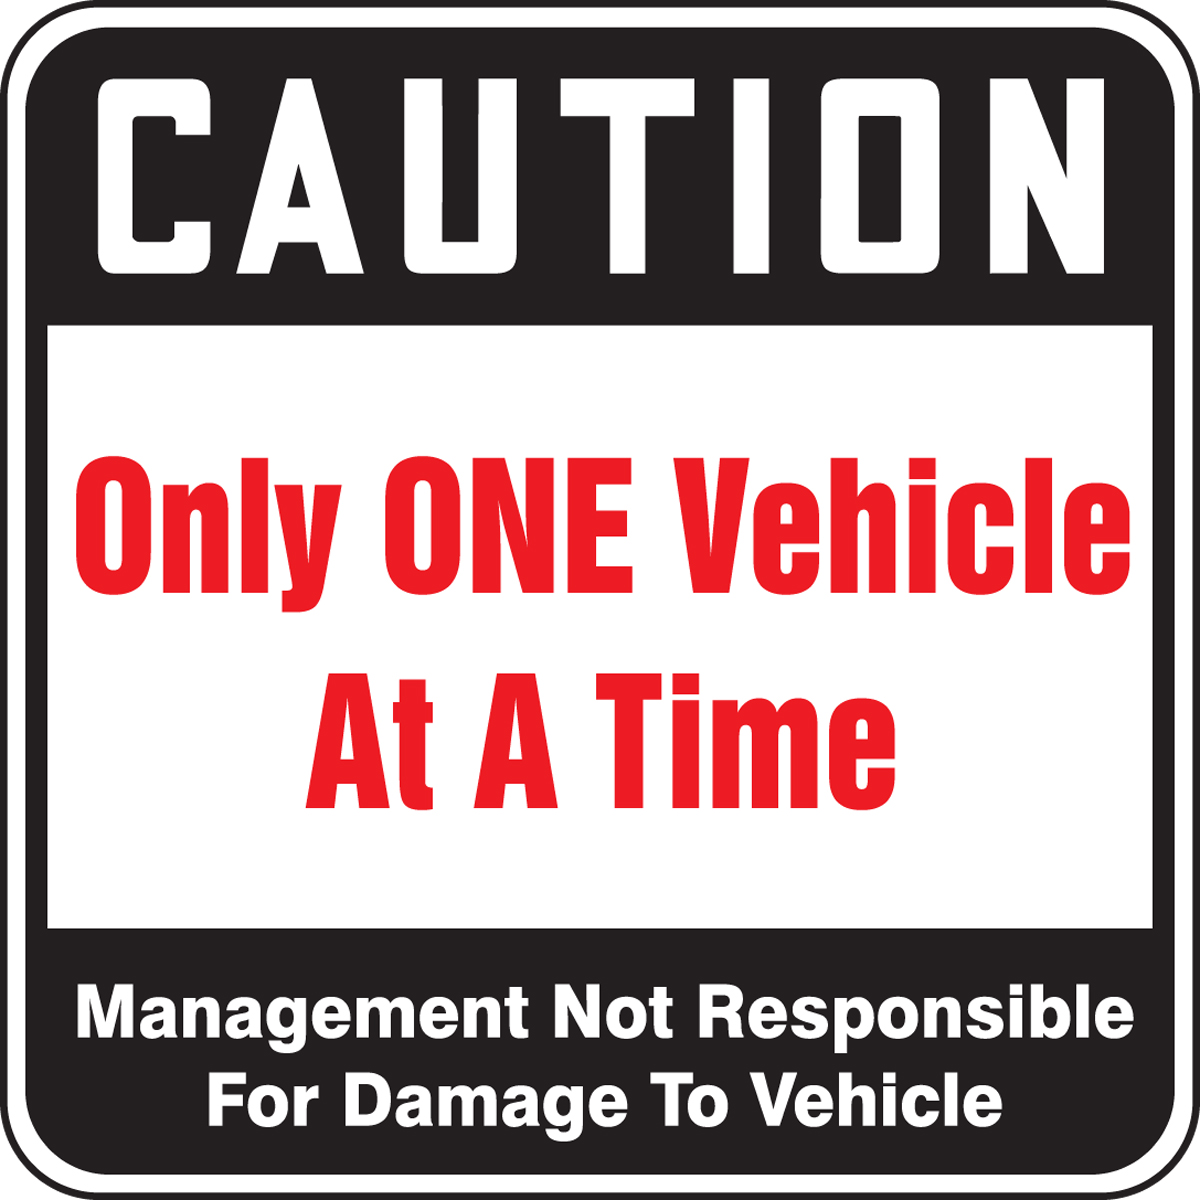 CAUTION ONLY ONE VEHICLE AT A TIIME MANAGEMENT NOT RESPONSIBLE FOR DAMAGE TO VEHICLE